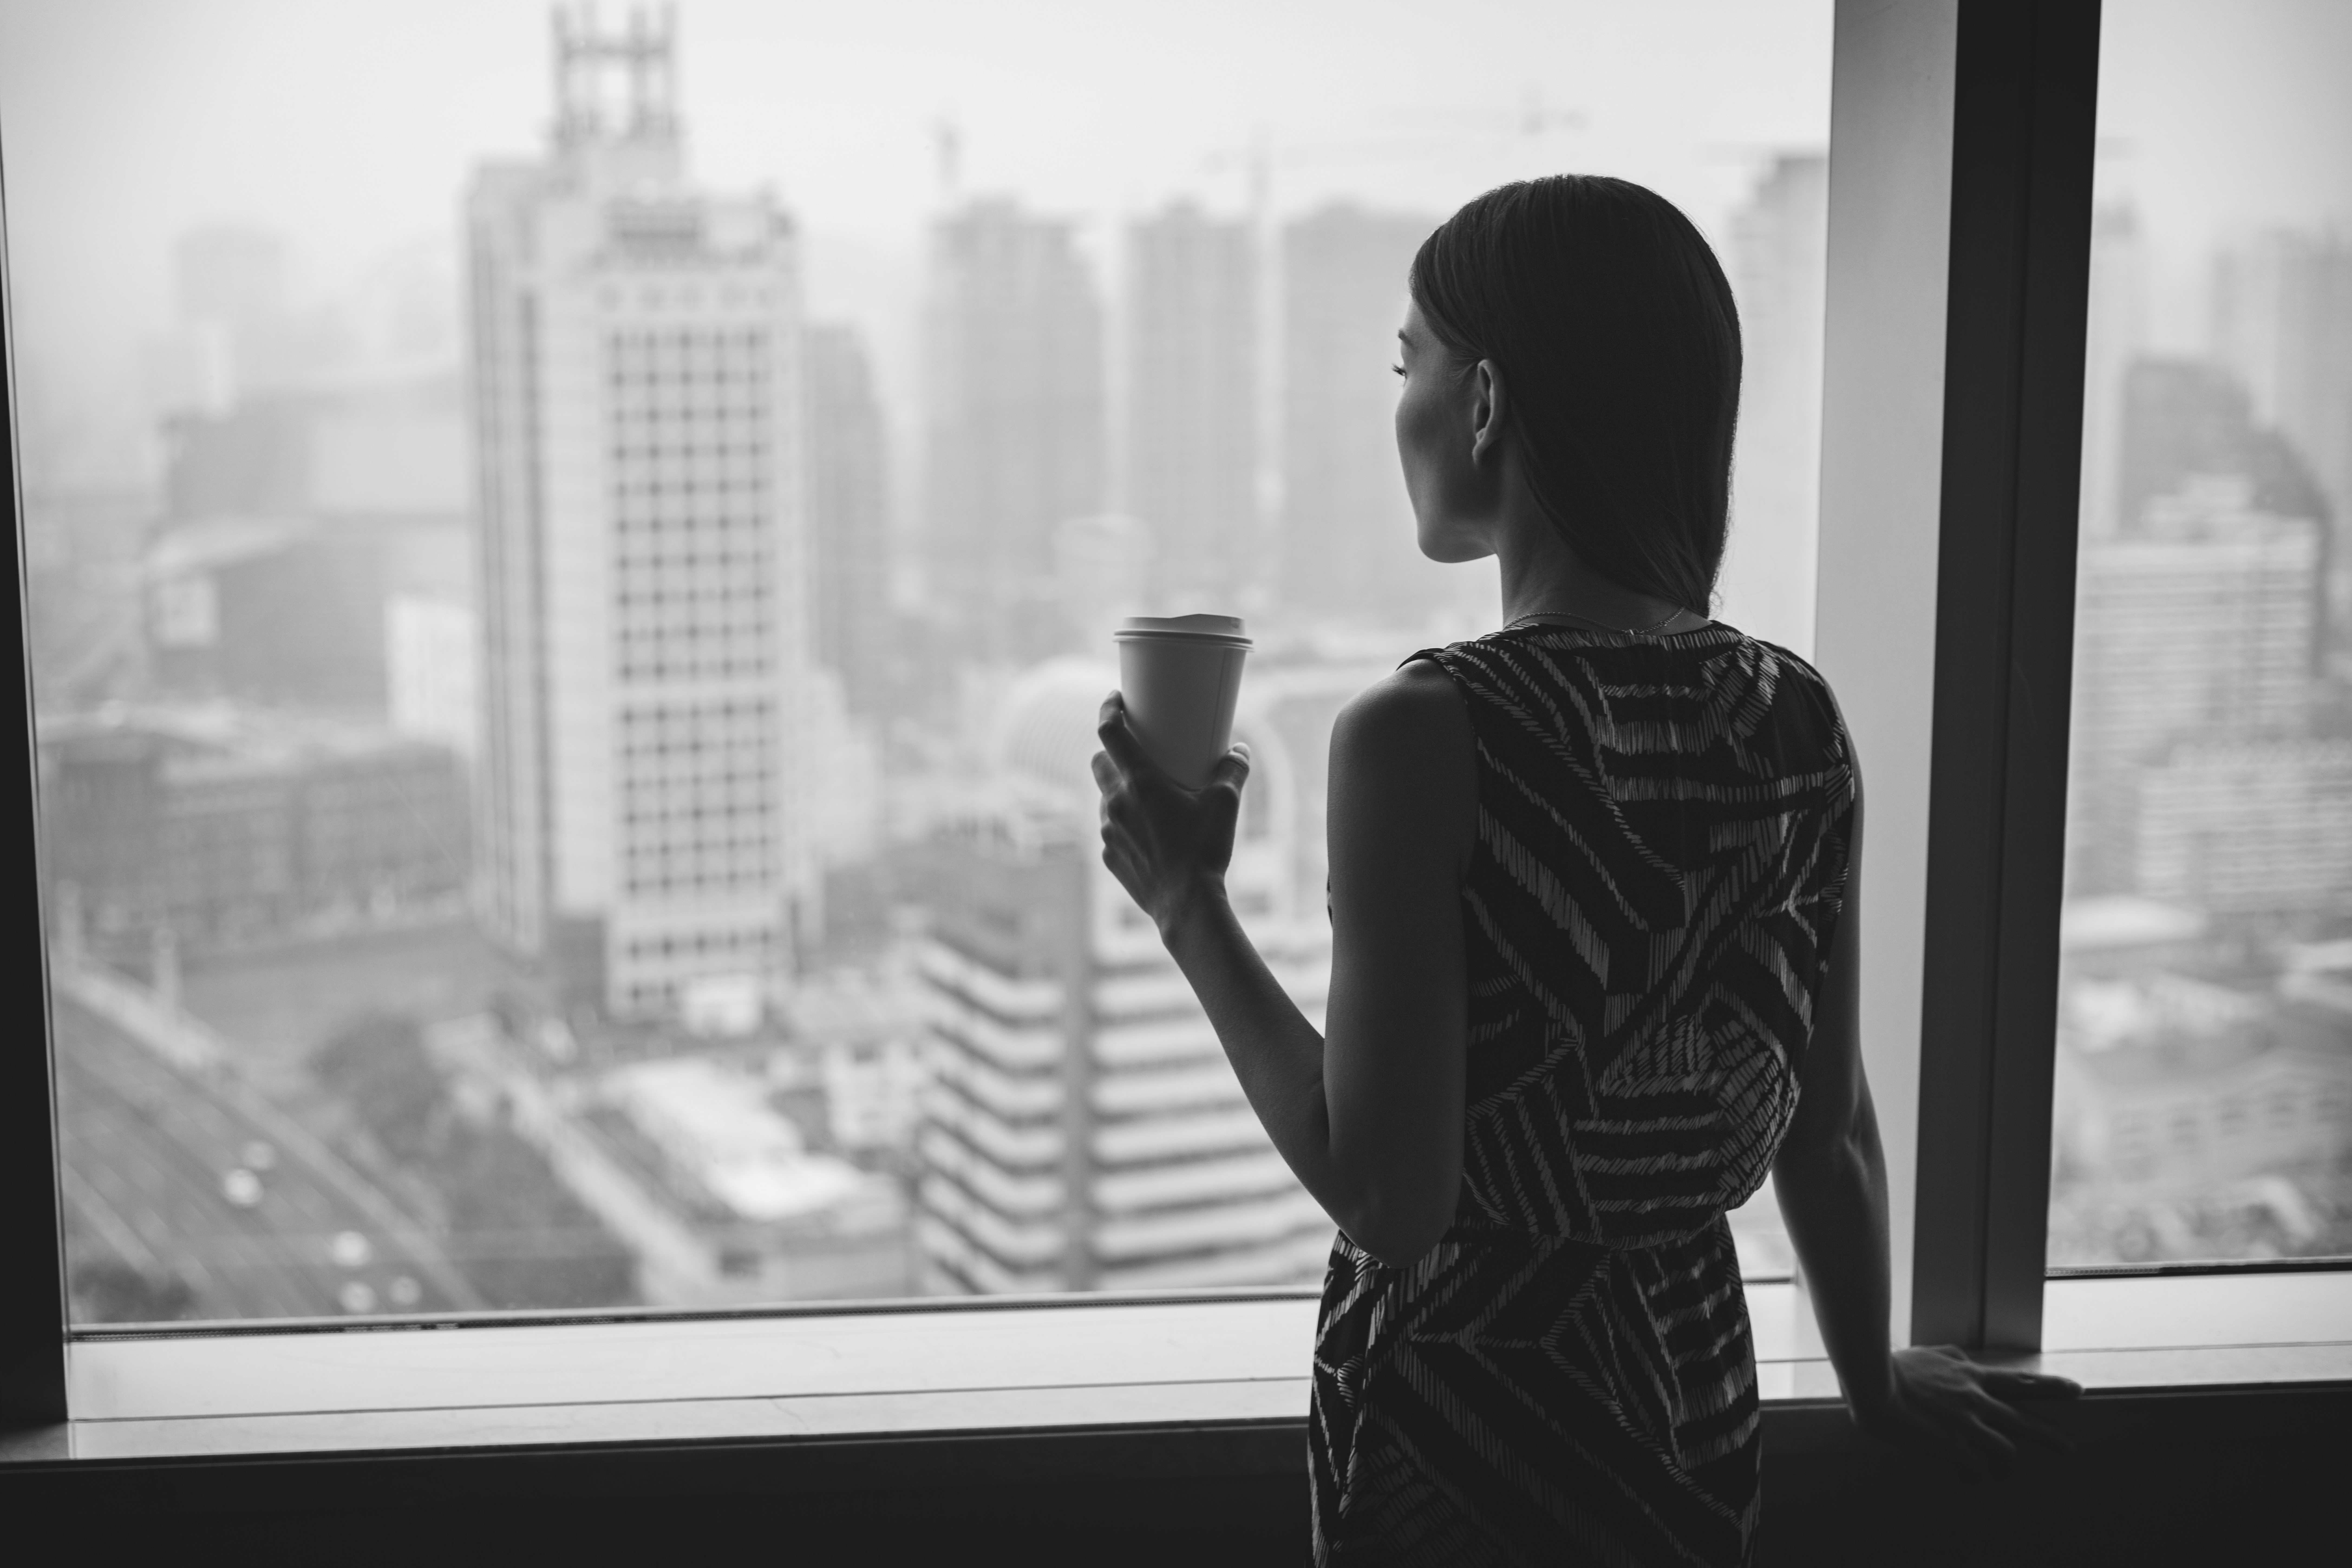 Businesswoman drinking coffee at work contemplative looking out the window of high rise skyscraper building.